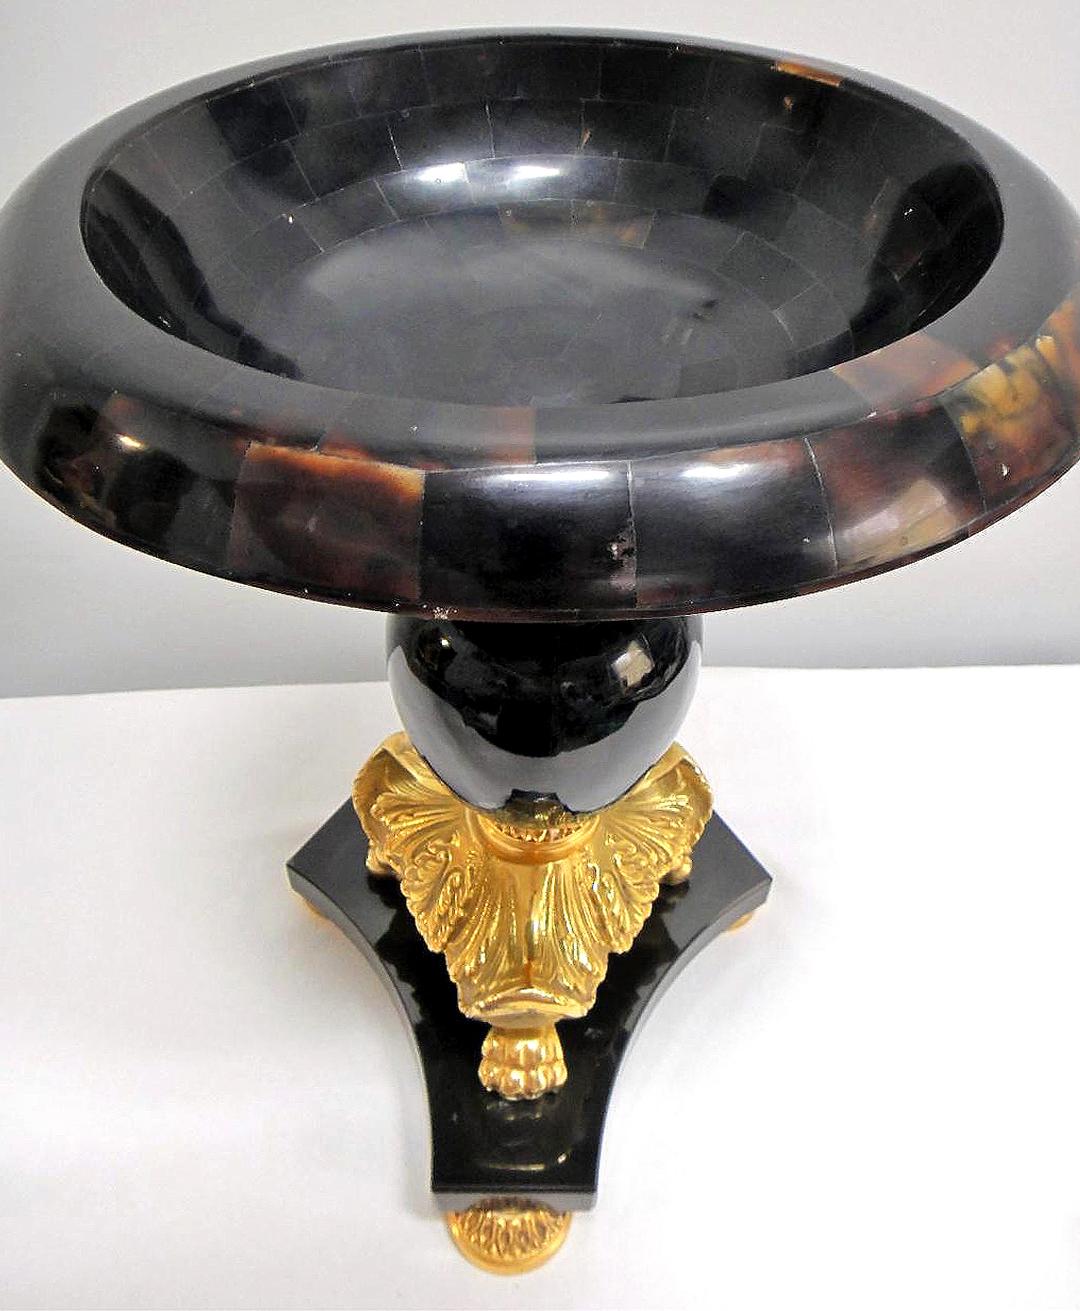 Laudarte Srl Oversale Marble, Bronze and Horn Urn, Italy

Offered for sale is a stately marble and bronze urn with a tessellated Horn top by Laudarte Srl. The urn is finely crafted with inset marble details on the underside. Laudarte designs and